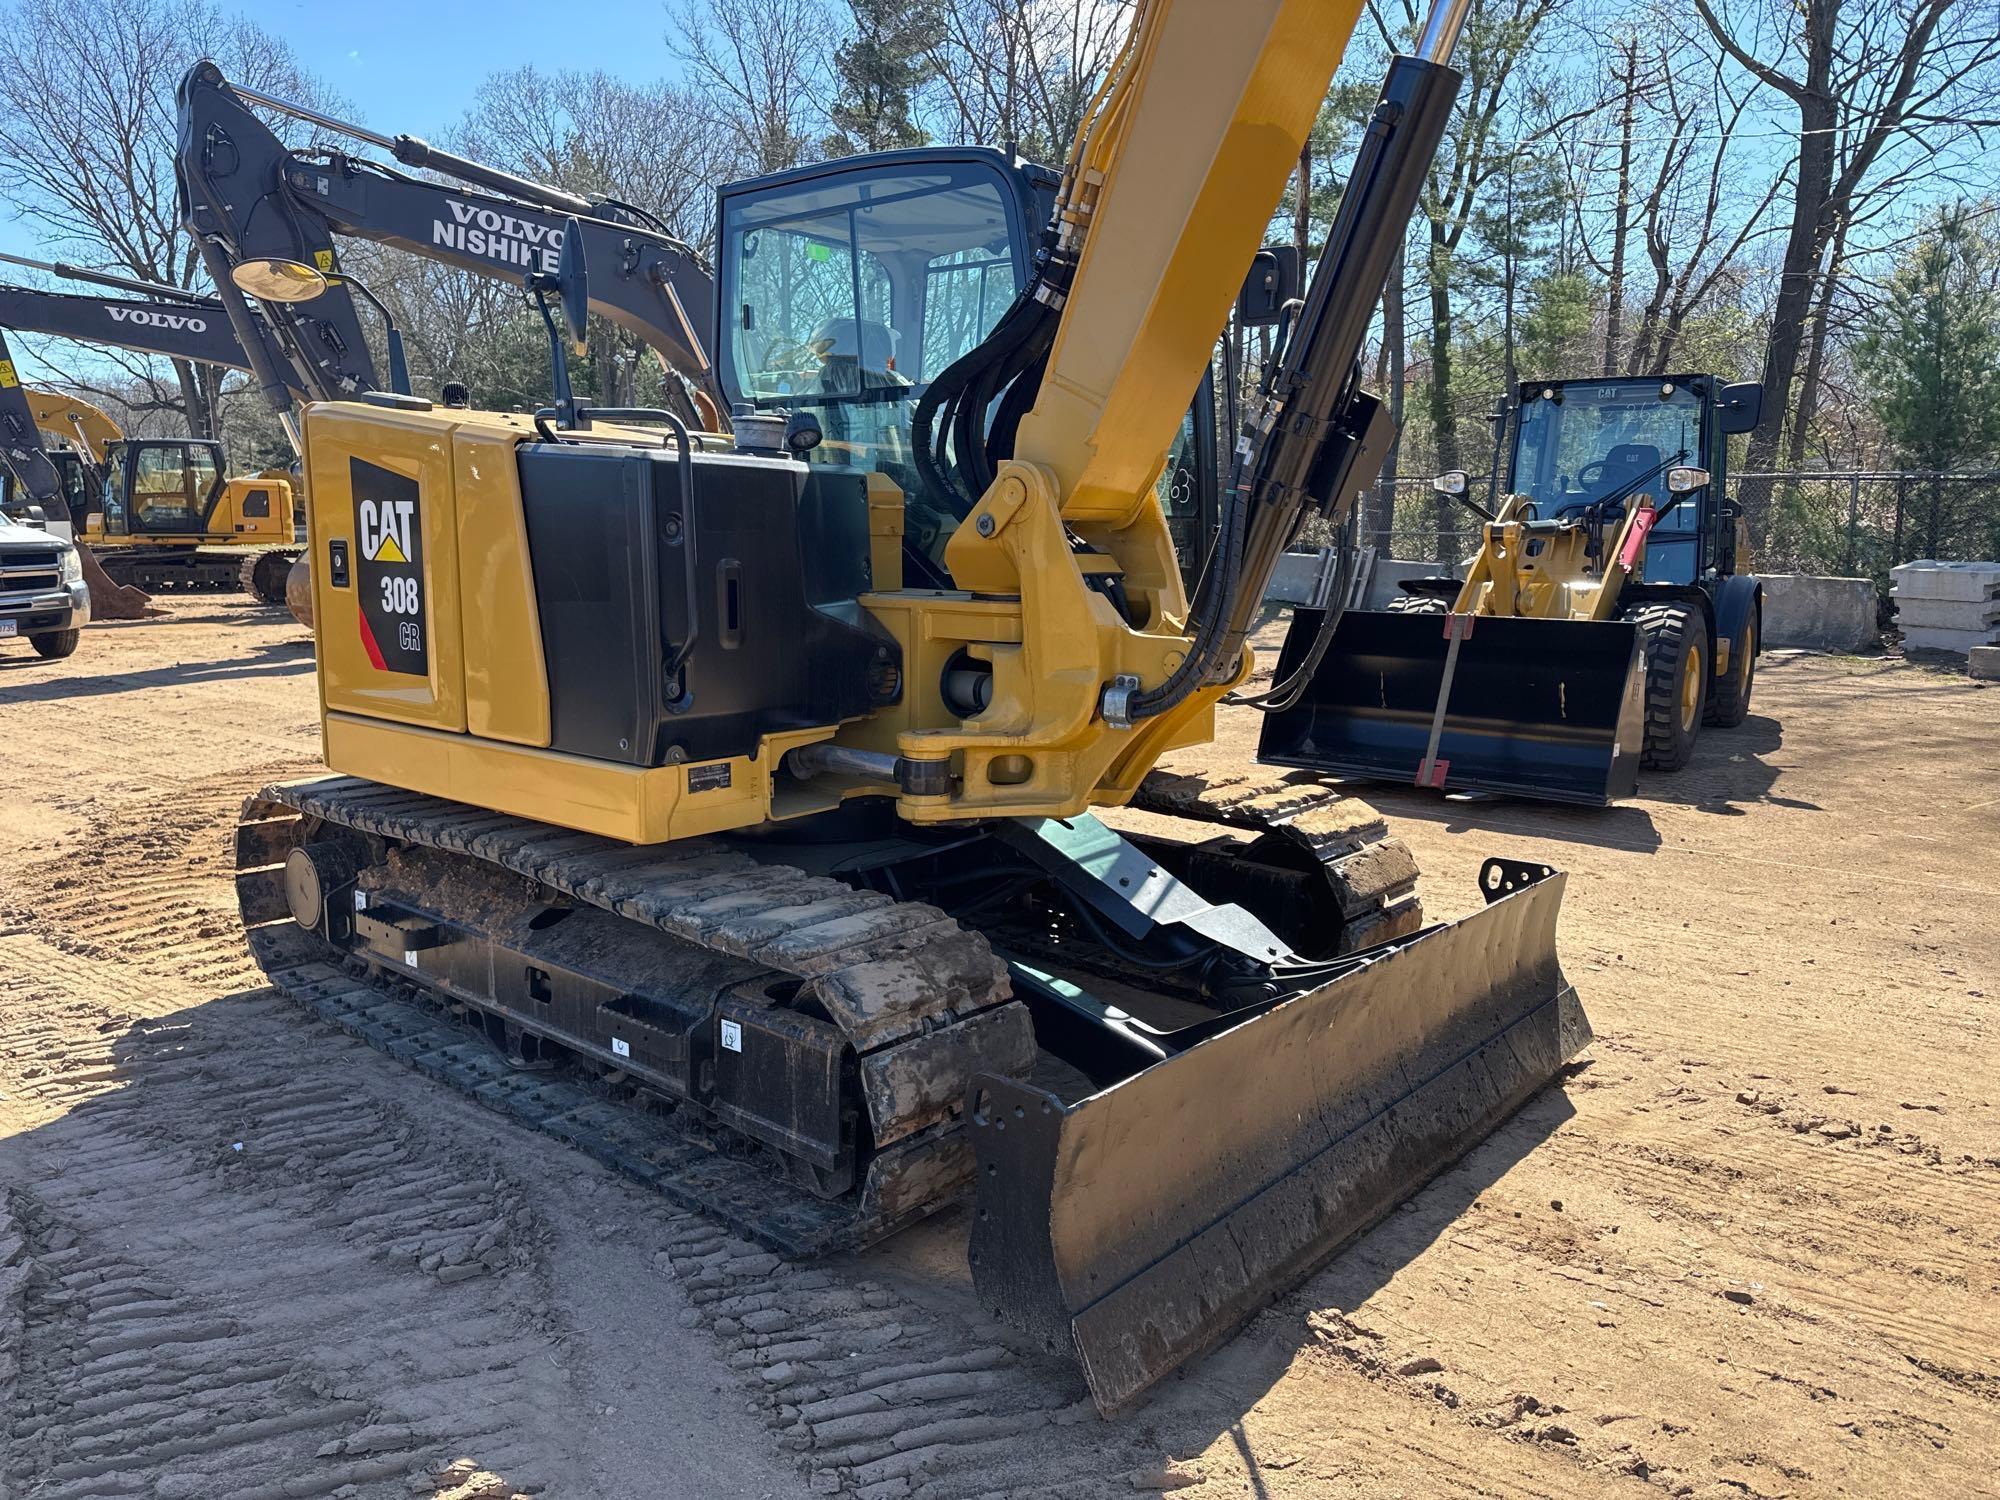 2021 CAT 308CR HYDRAULIC EXCAVATOR SN:GW800851powered by Cat diesel engine, equipped with Cab, air,